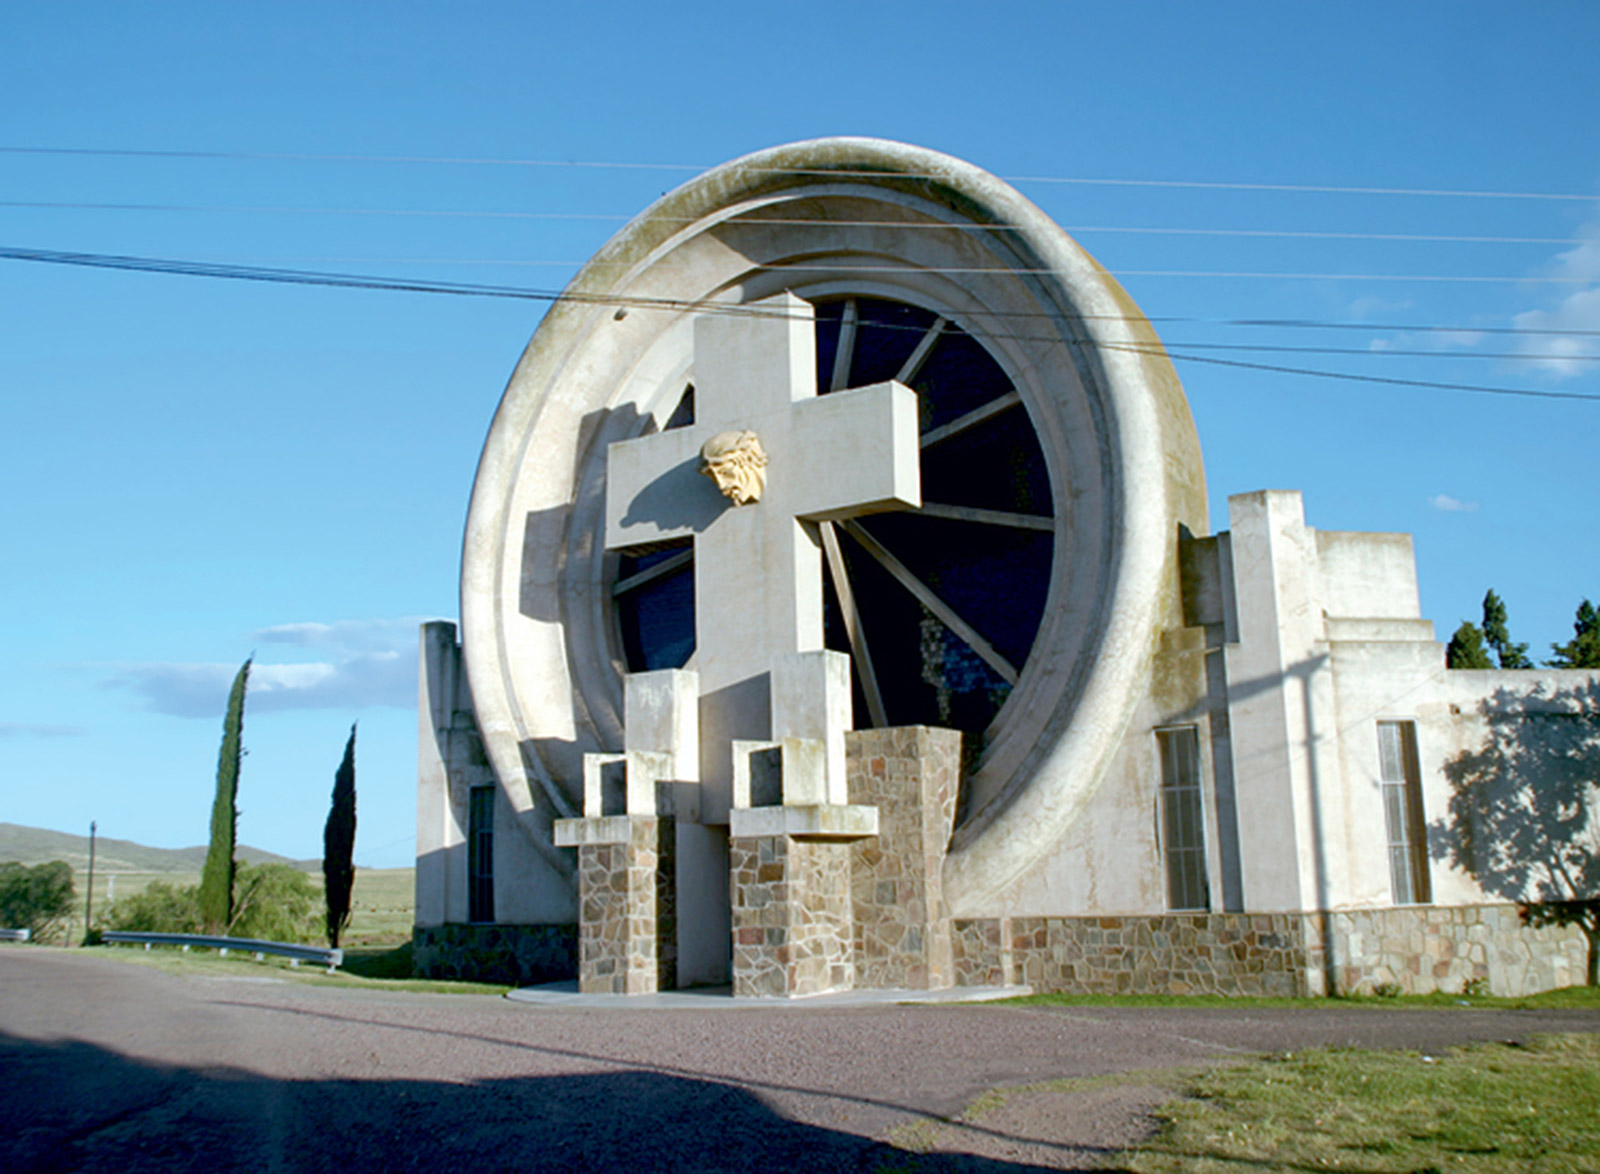 A photograph of a cemetery portal designed by architect Francisco Salamone in Saldungaray, Argentina. 